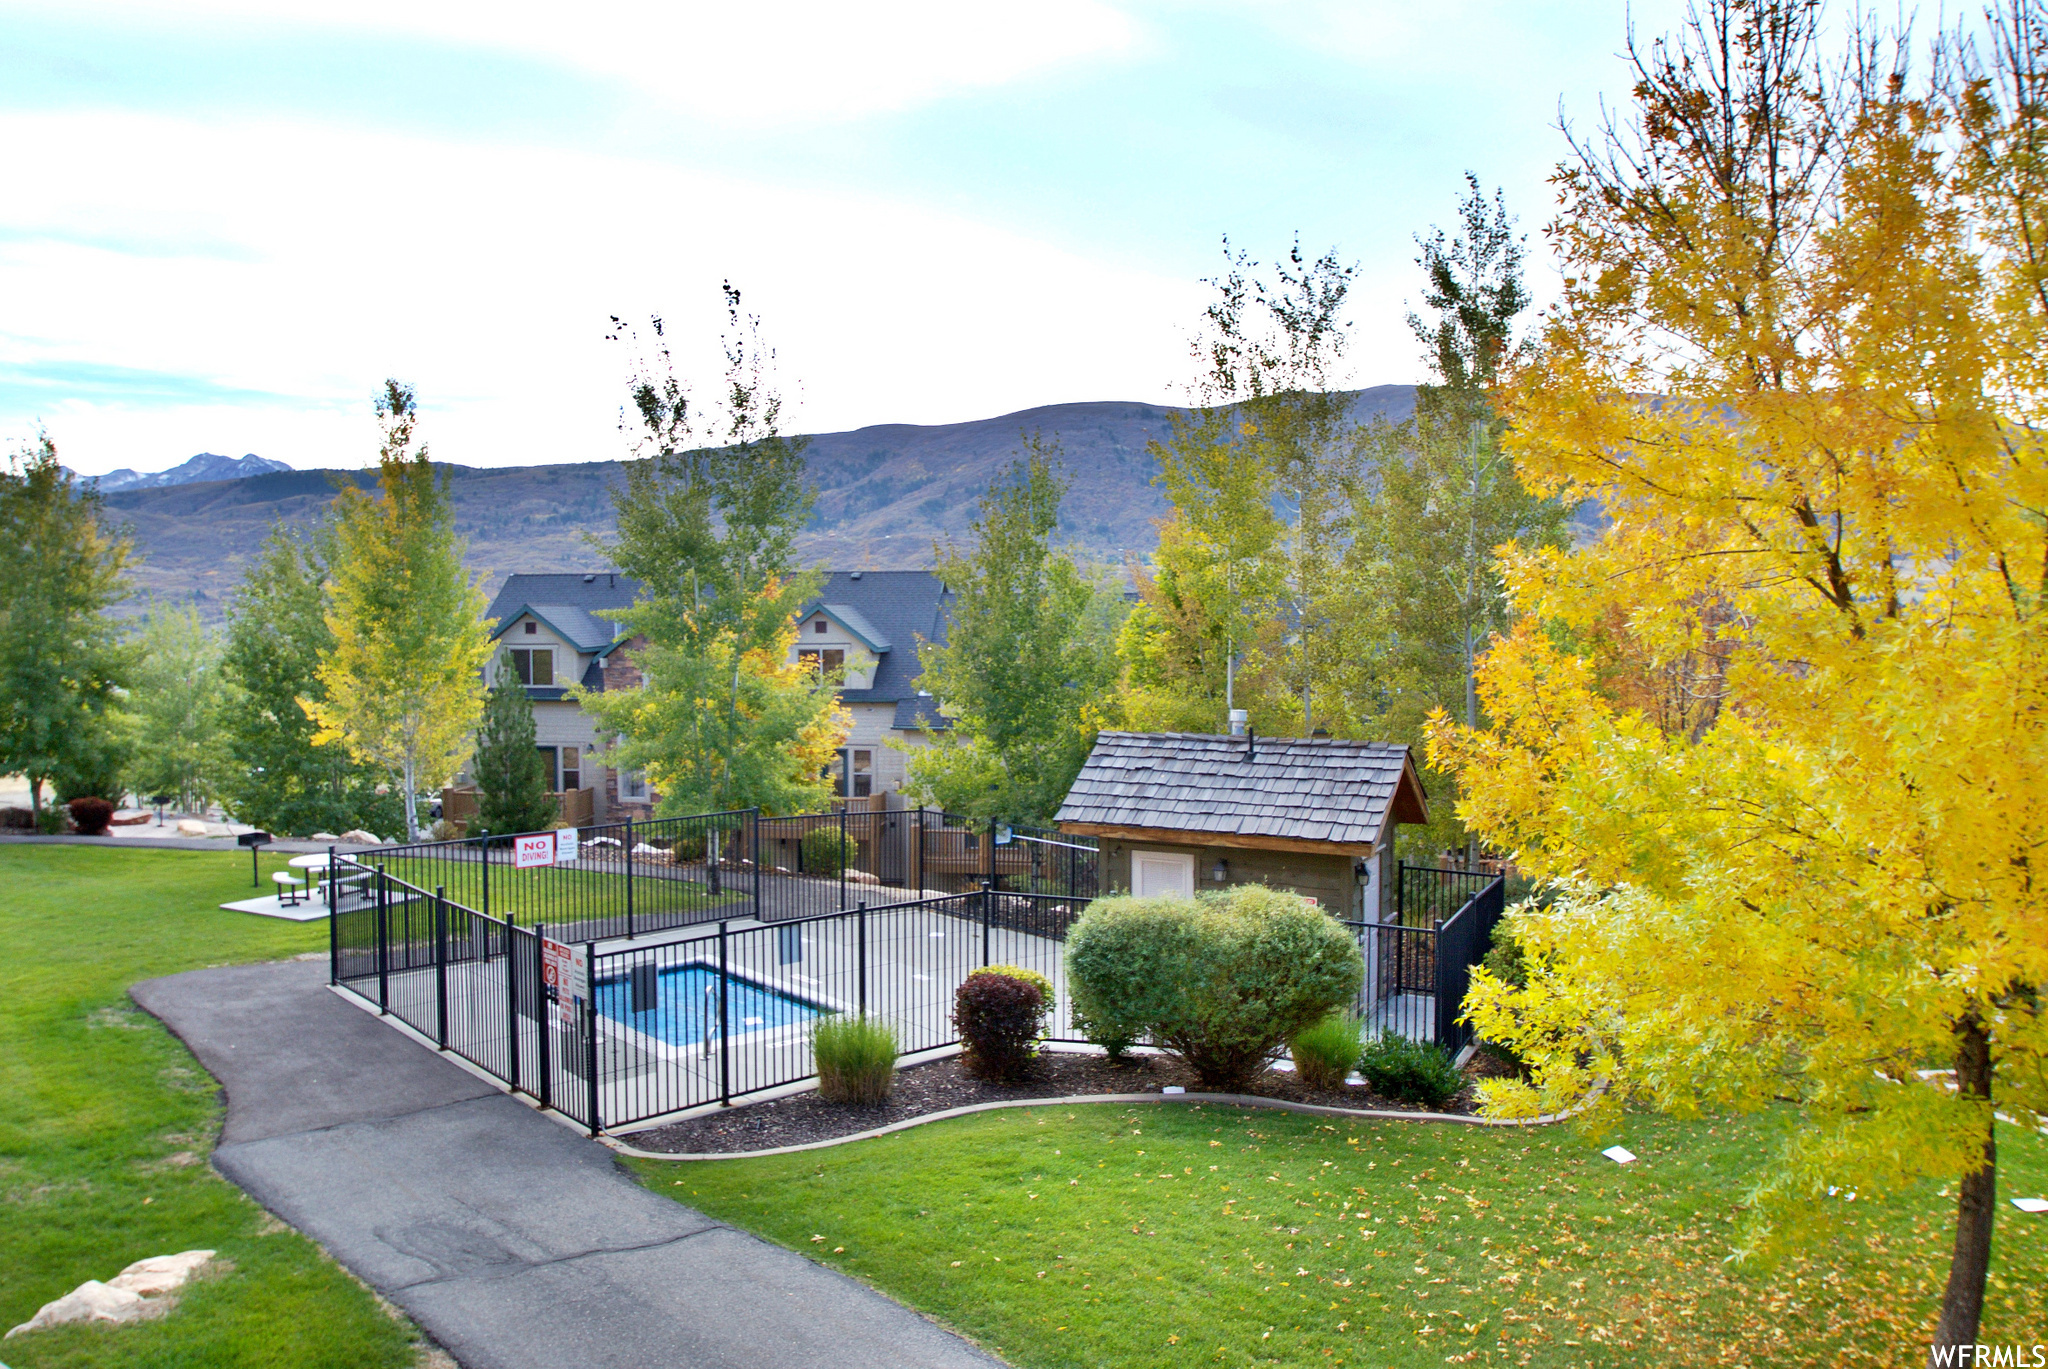 View of home's community featuring an outdoor structure, a lawn, and a mountain view